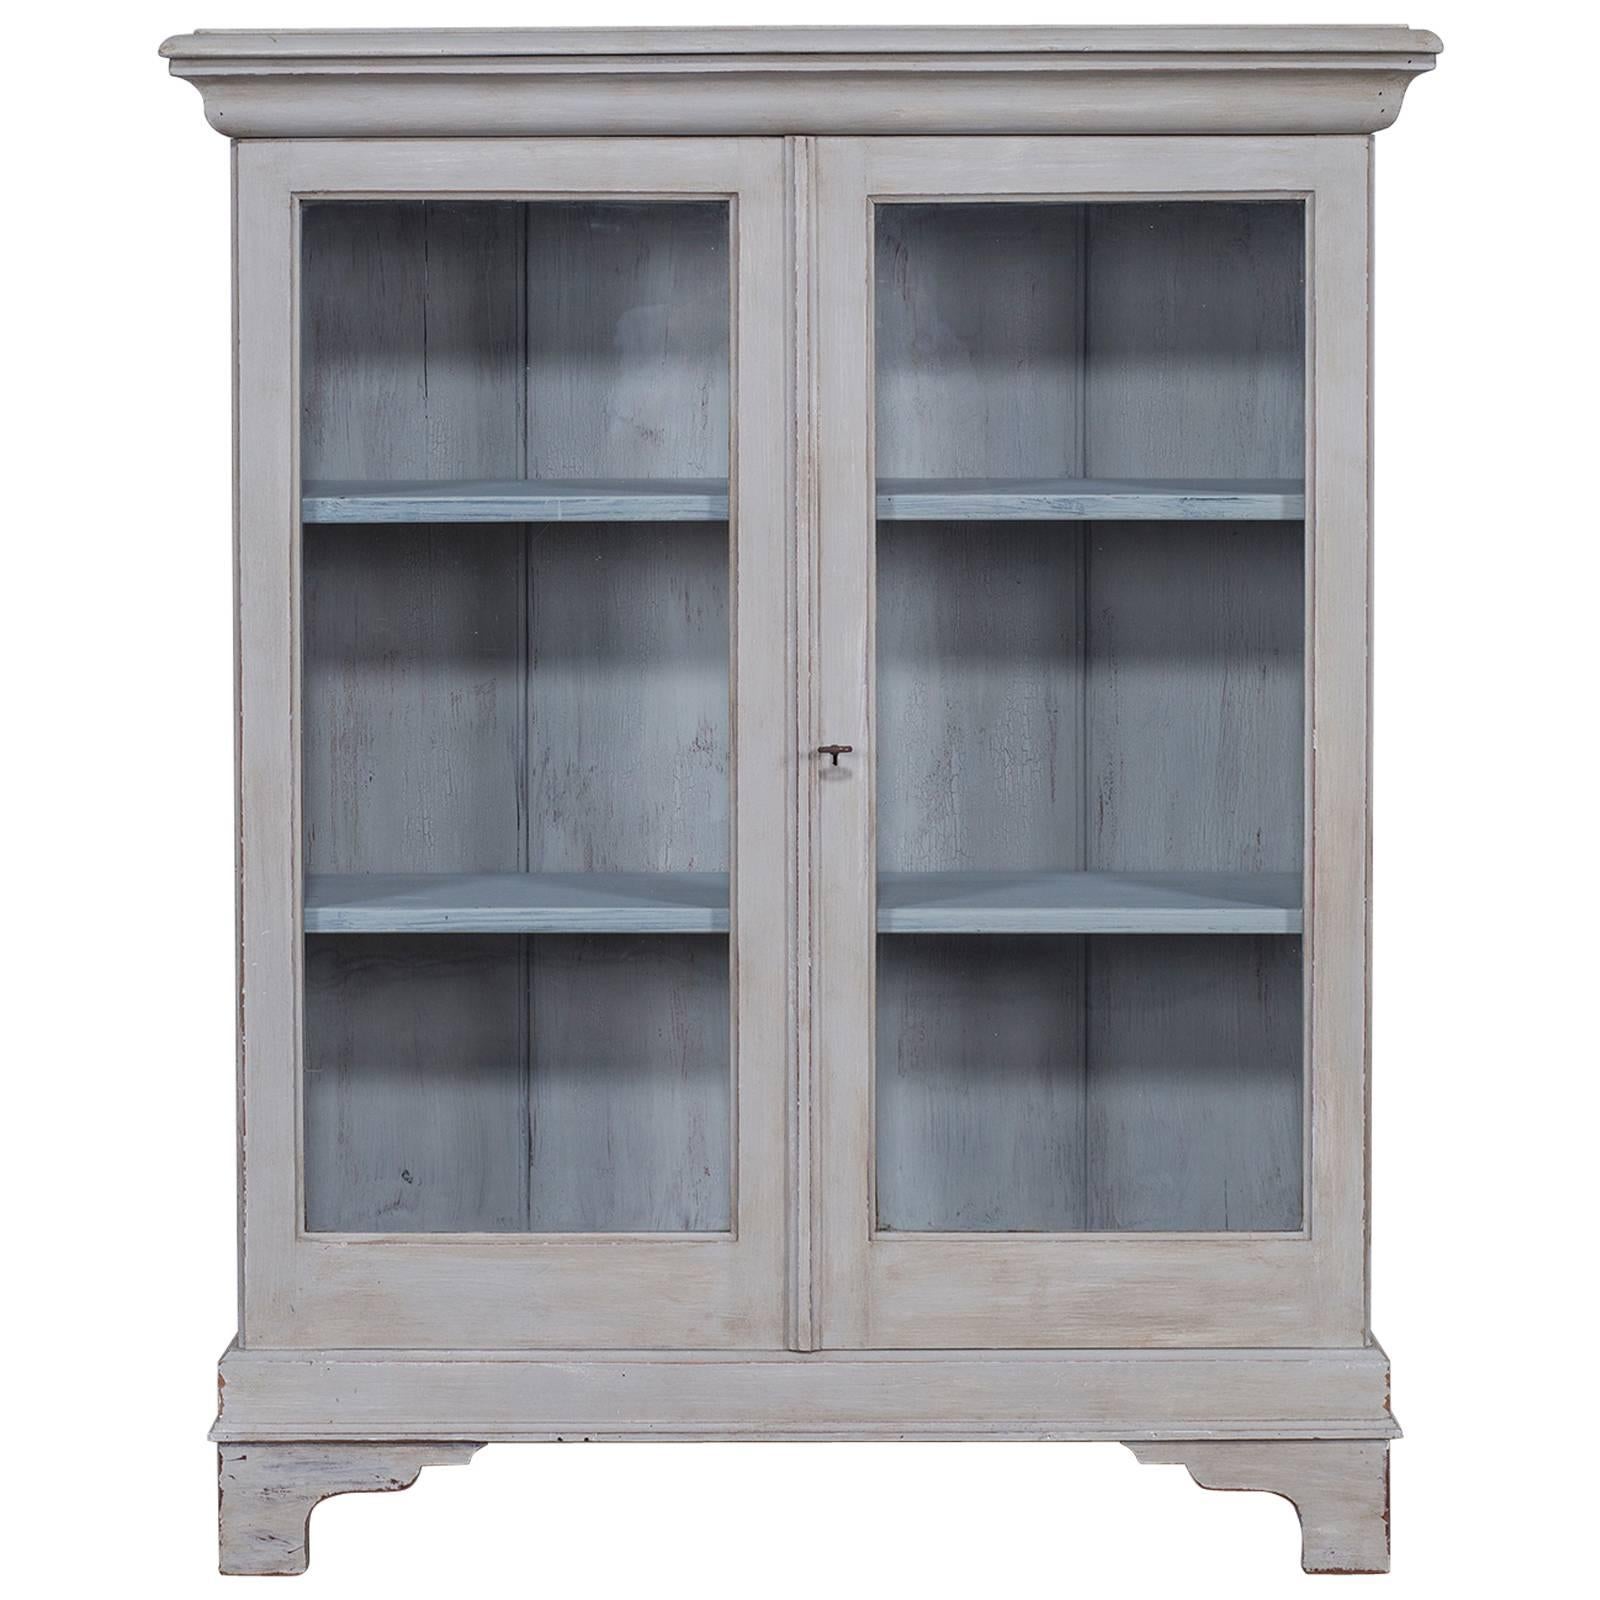 Antique English Painted Bookcase Display Cabinet, circa 1875